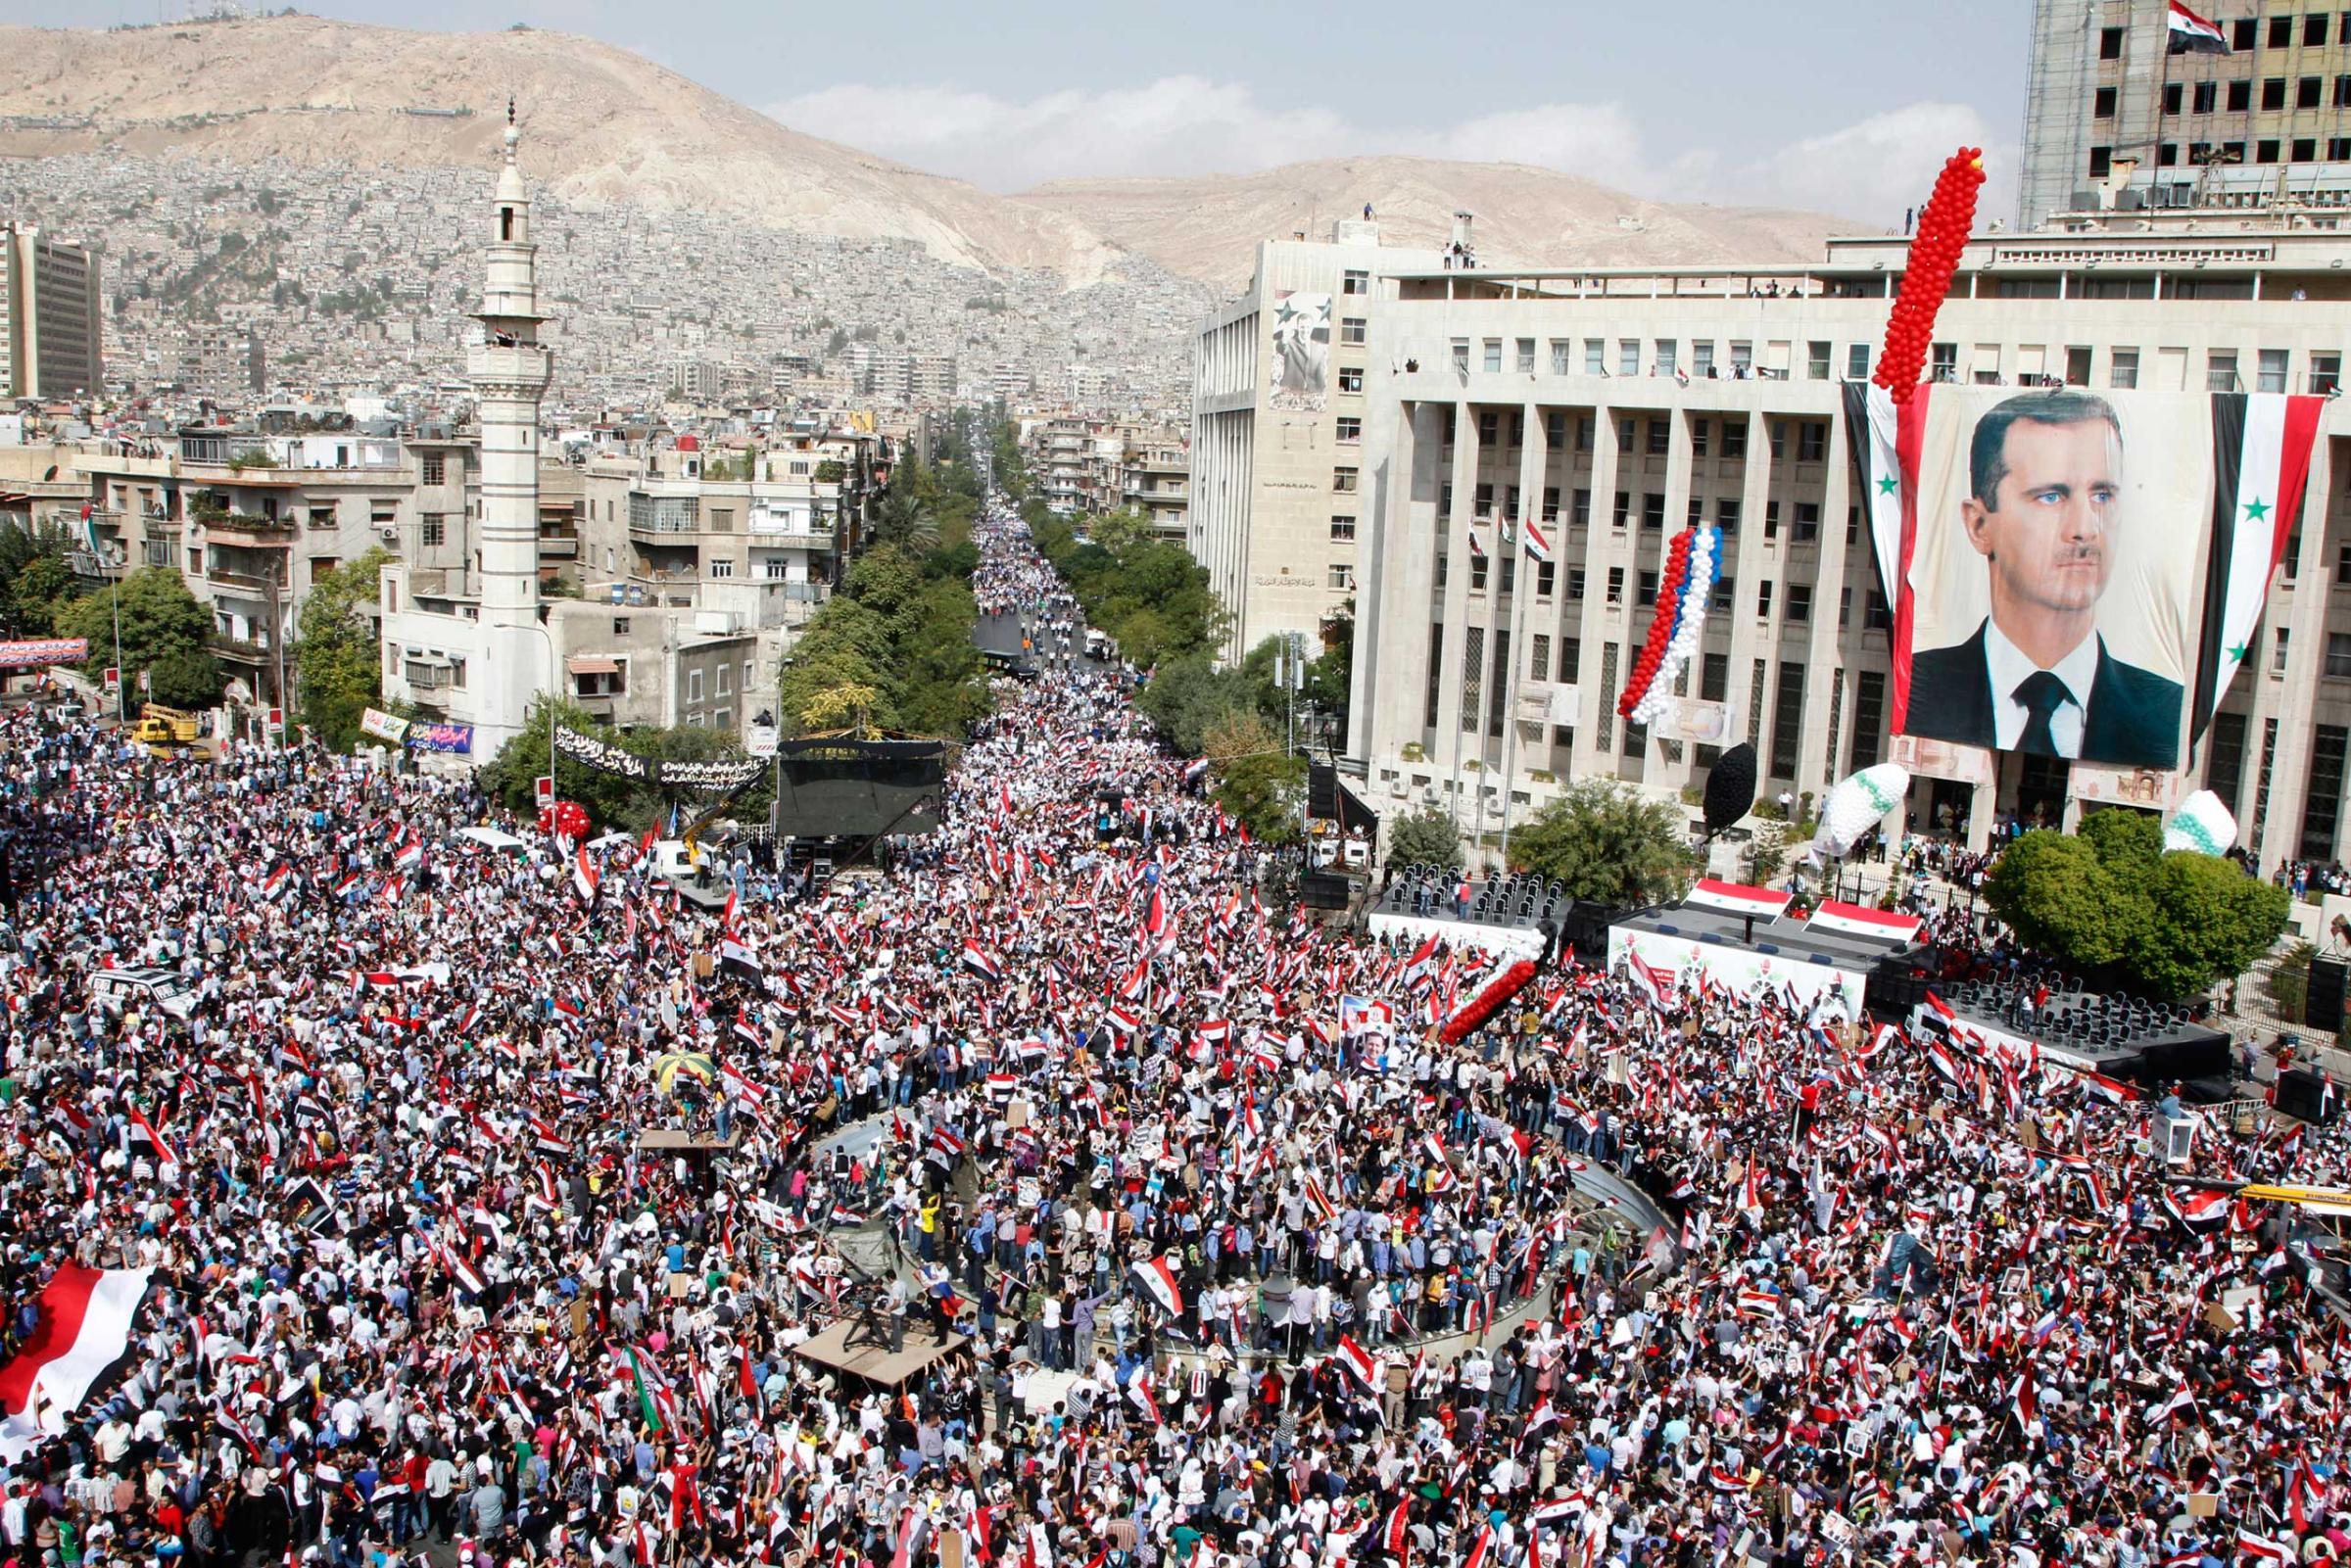 Supporters of Syrian President Bashar al-Assad's gather during a rally at al-Sabaa Bahrat square in Damascus on Oct. 12, 2011.